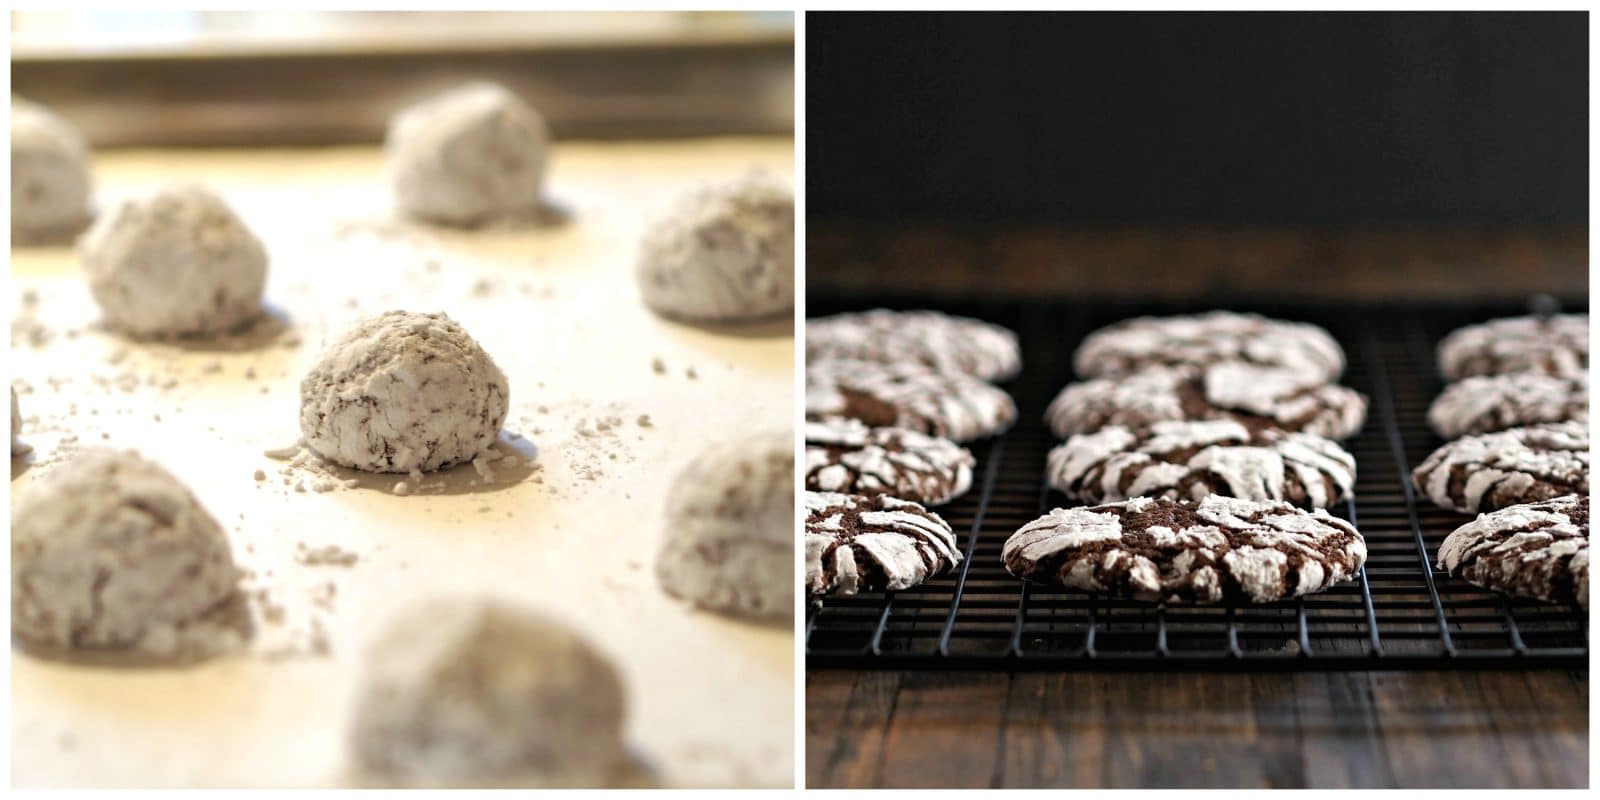 Mexican Chocolate Crinkles - add a little heat to an all-time favorite cookie. After all, "Variety is the very spice of life, that gives it all its flavor." Simply Sated